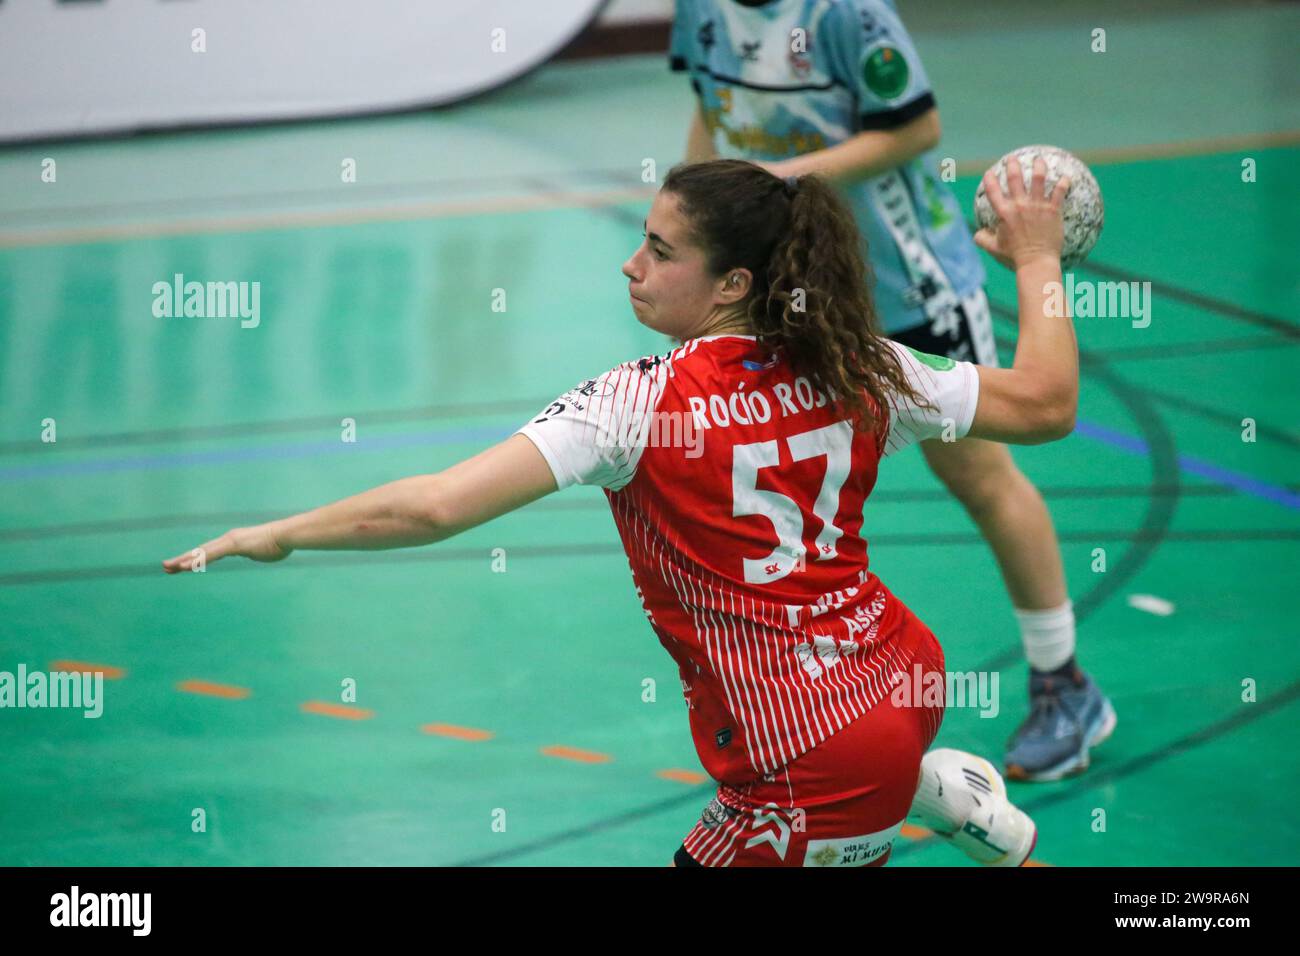 Gijon, Spain, 29th December, 2023: The player of Motive.co Gijon Balonmano La Calzada, Rocio Rojas (57) throws a seven meter during the 13th matchday of the Liga Guerreras Iberdrola 2023-24 between Motive.co Gijon Balonmano La Calzada and the Mecalia Atletico Guardes, on December 29, 2023, at the La Arena Pavilion, in Gijon, Spain. Credit: Alberto Brevers / Alamy Live News. Stock Photo